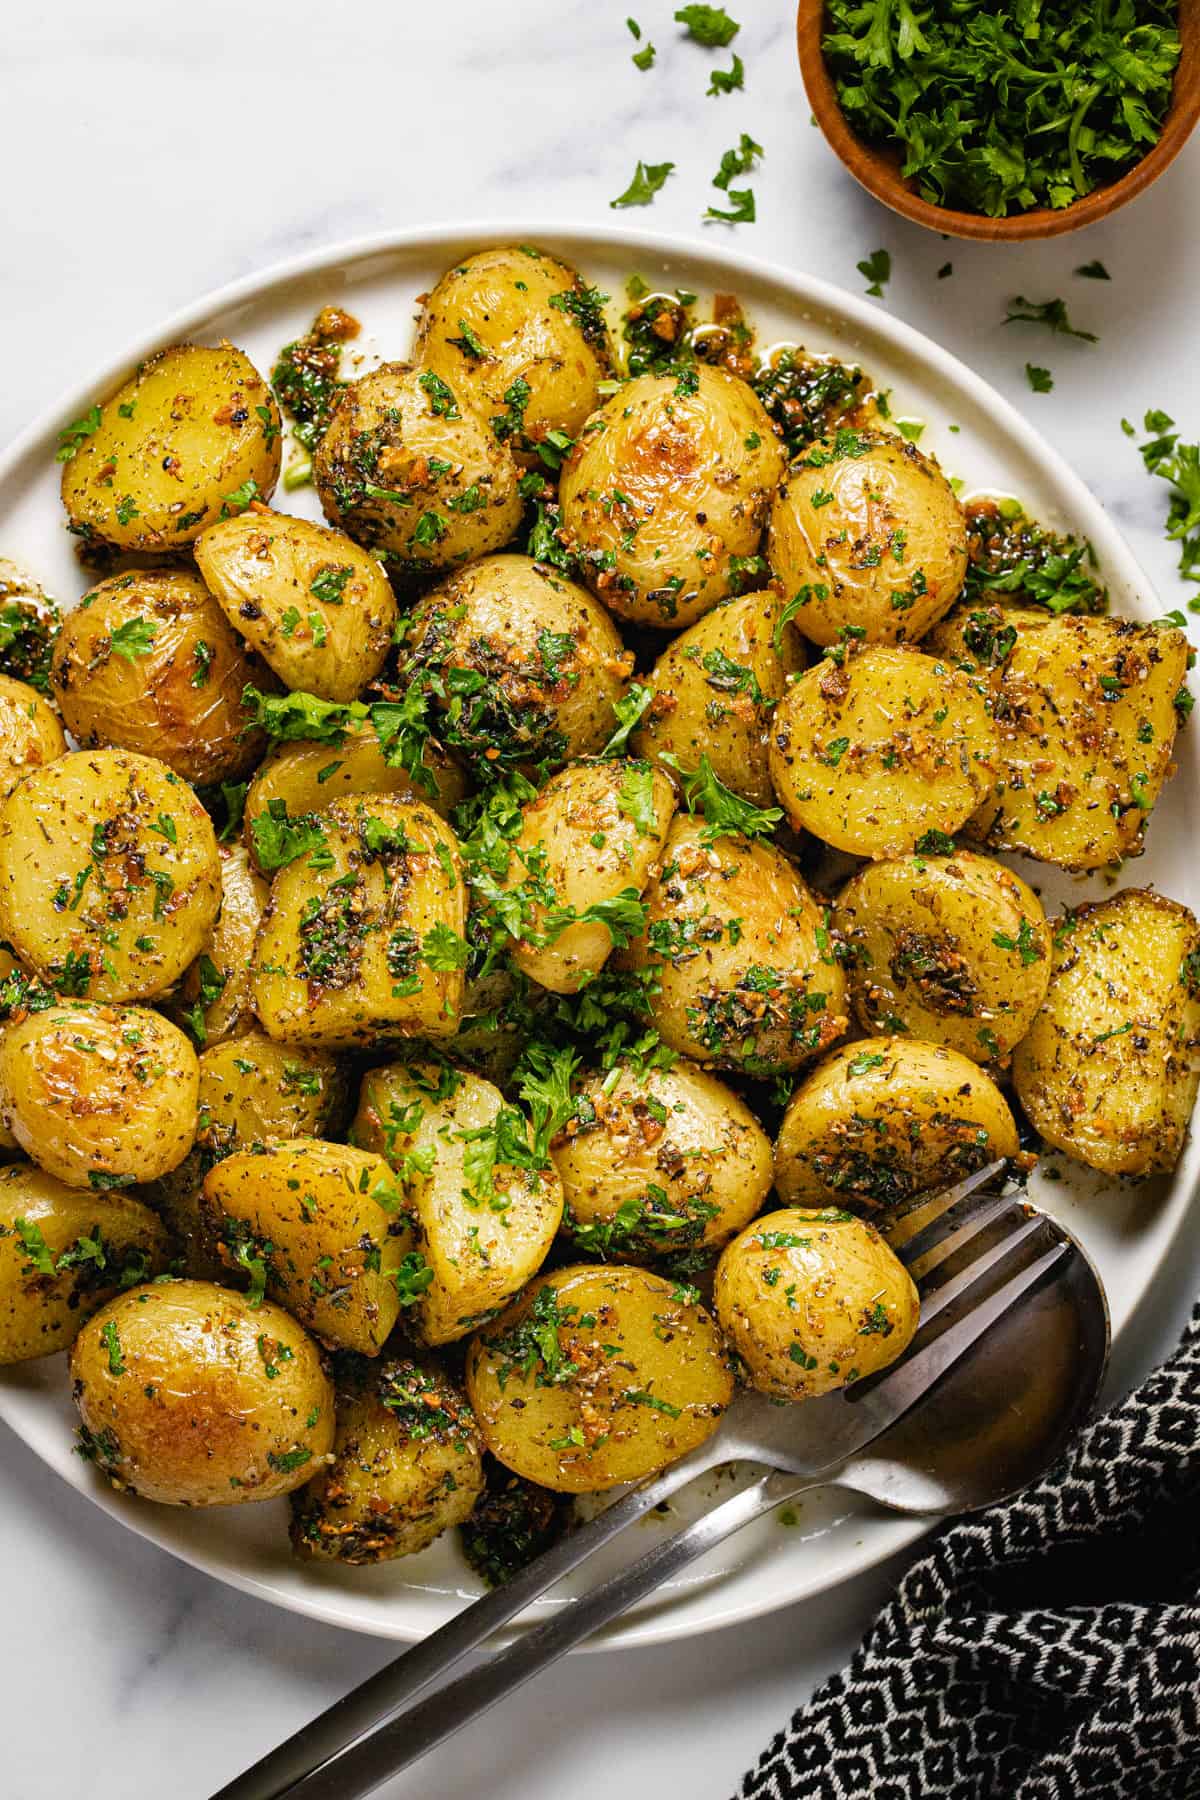 ROASTED MINI POTATOES WITH HERBS AND GARLIC STORY - The Endless Meal®